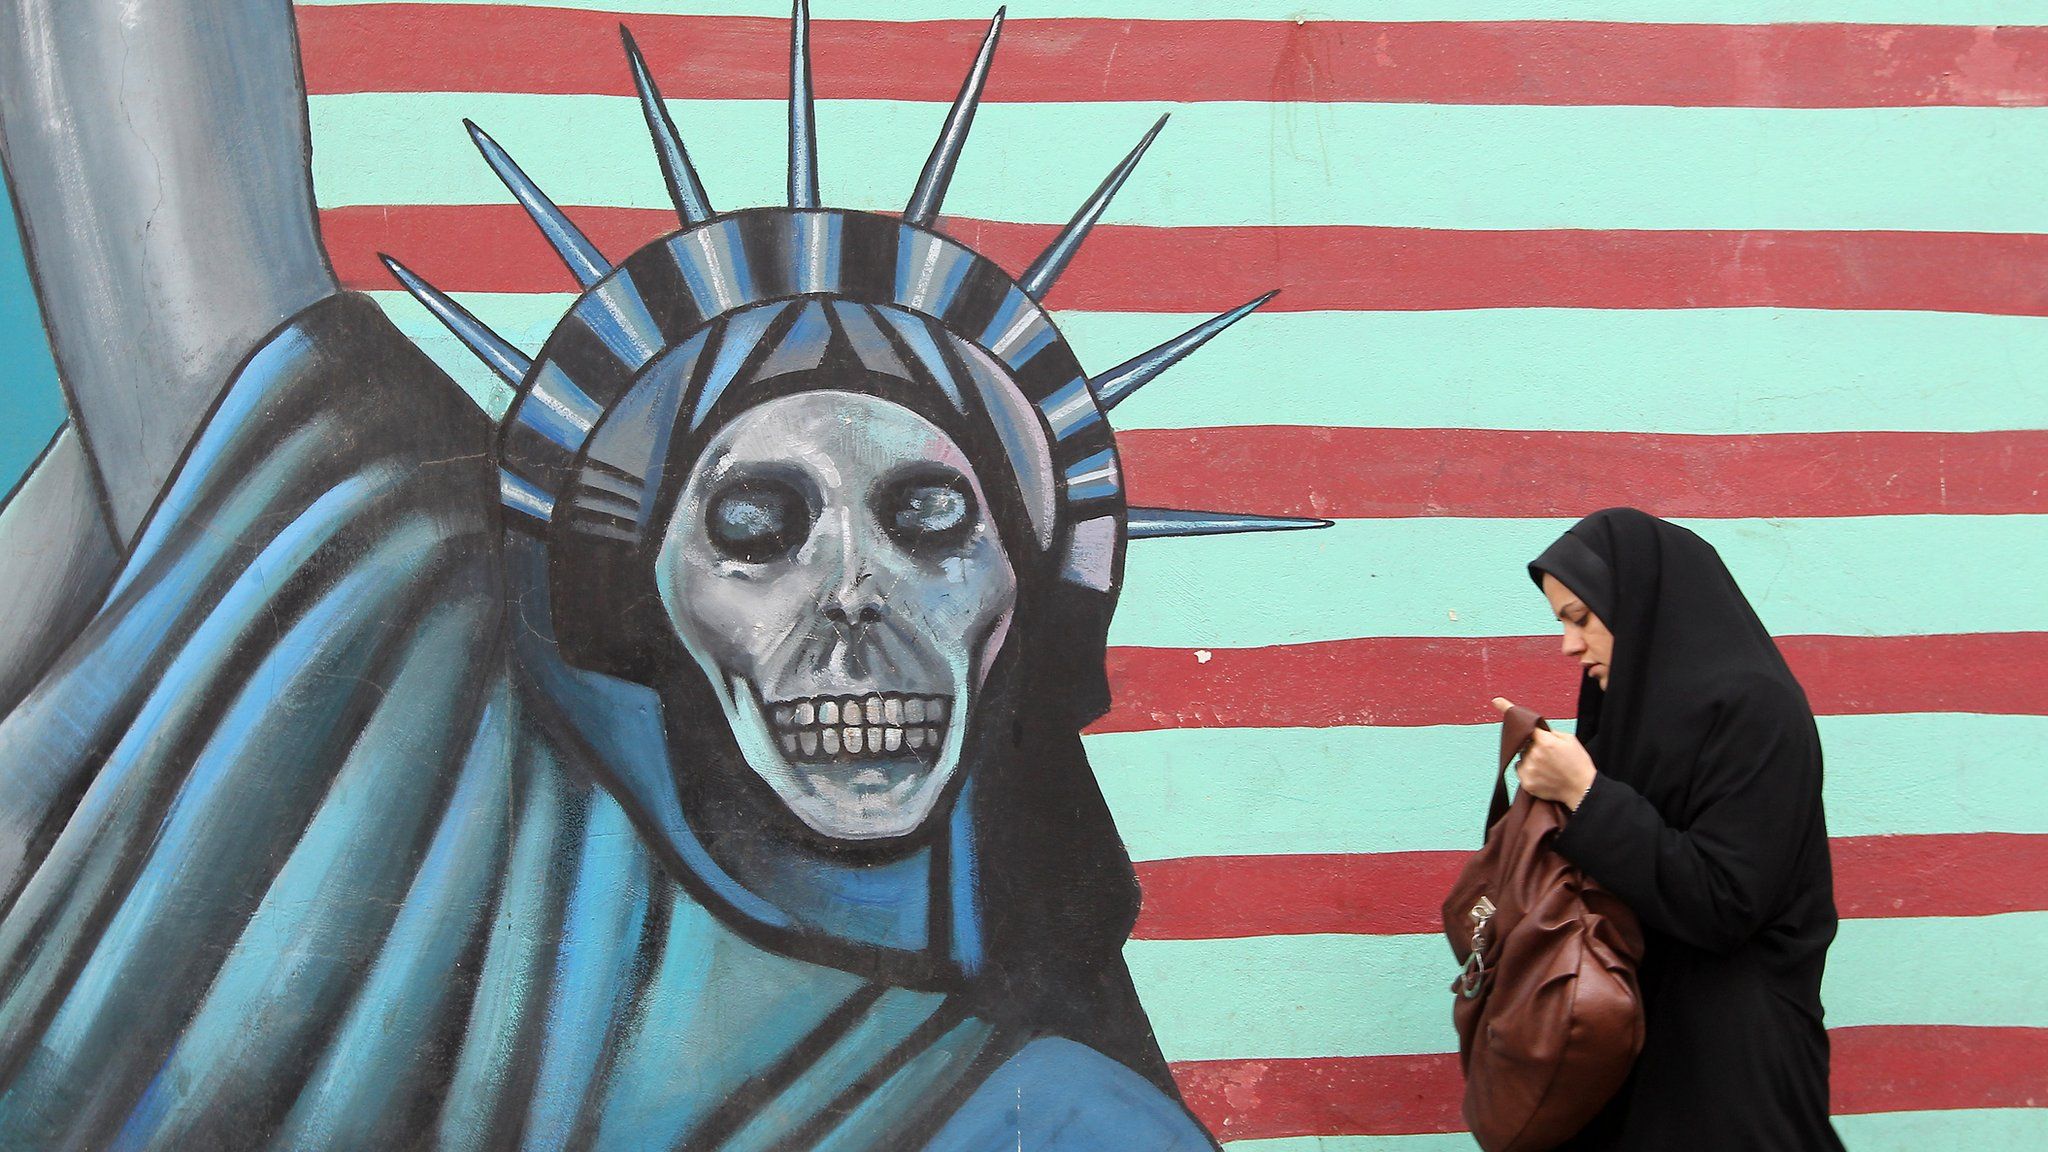 An Iranian woman walks past an anti-US mural painted on the wall of the former US embassy in Tehran in November 2011